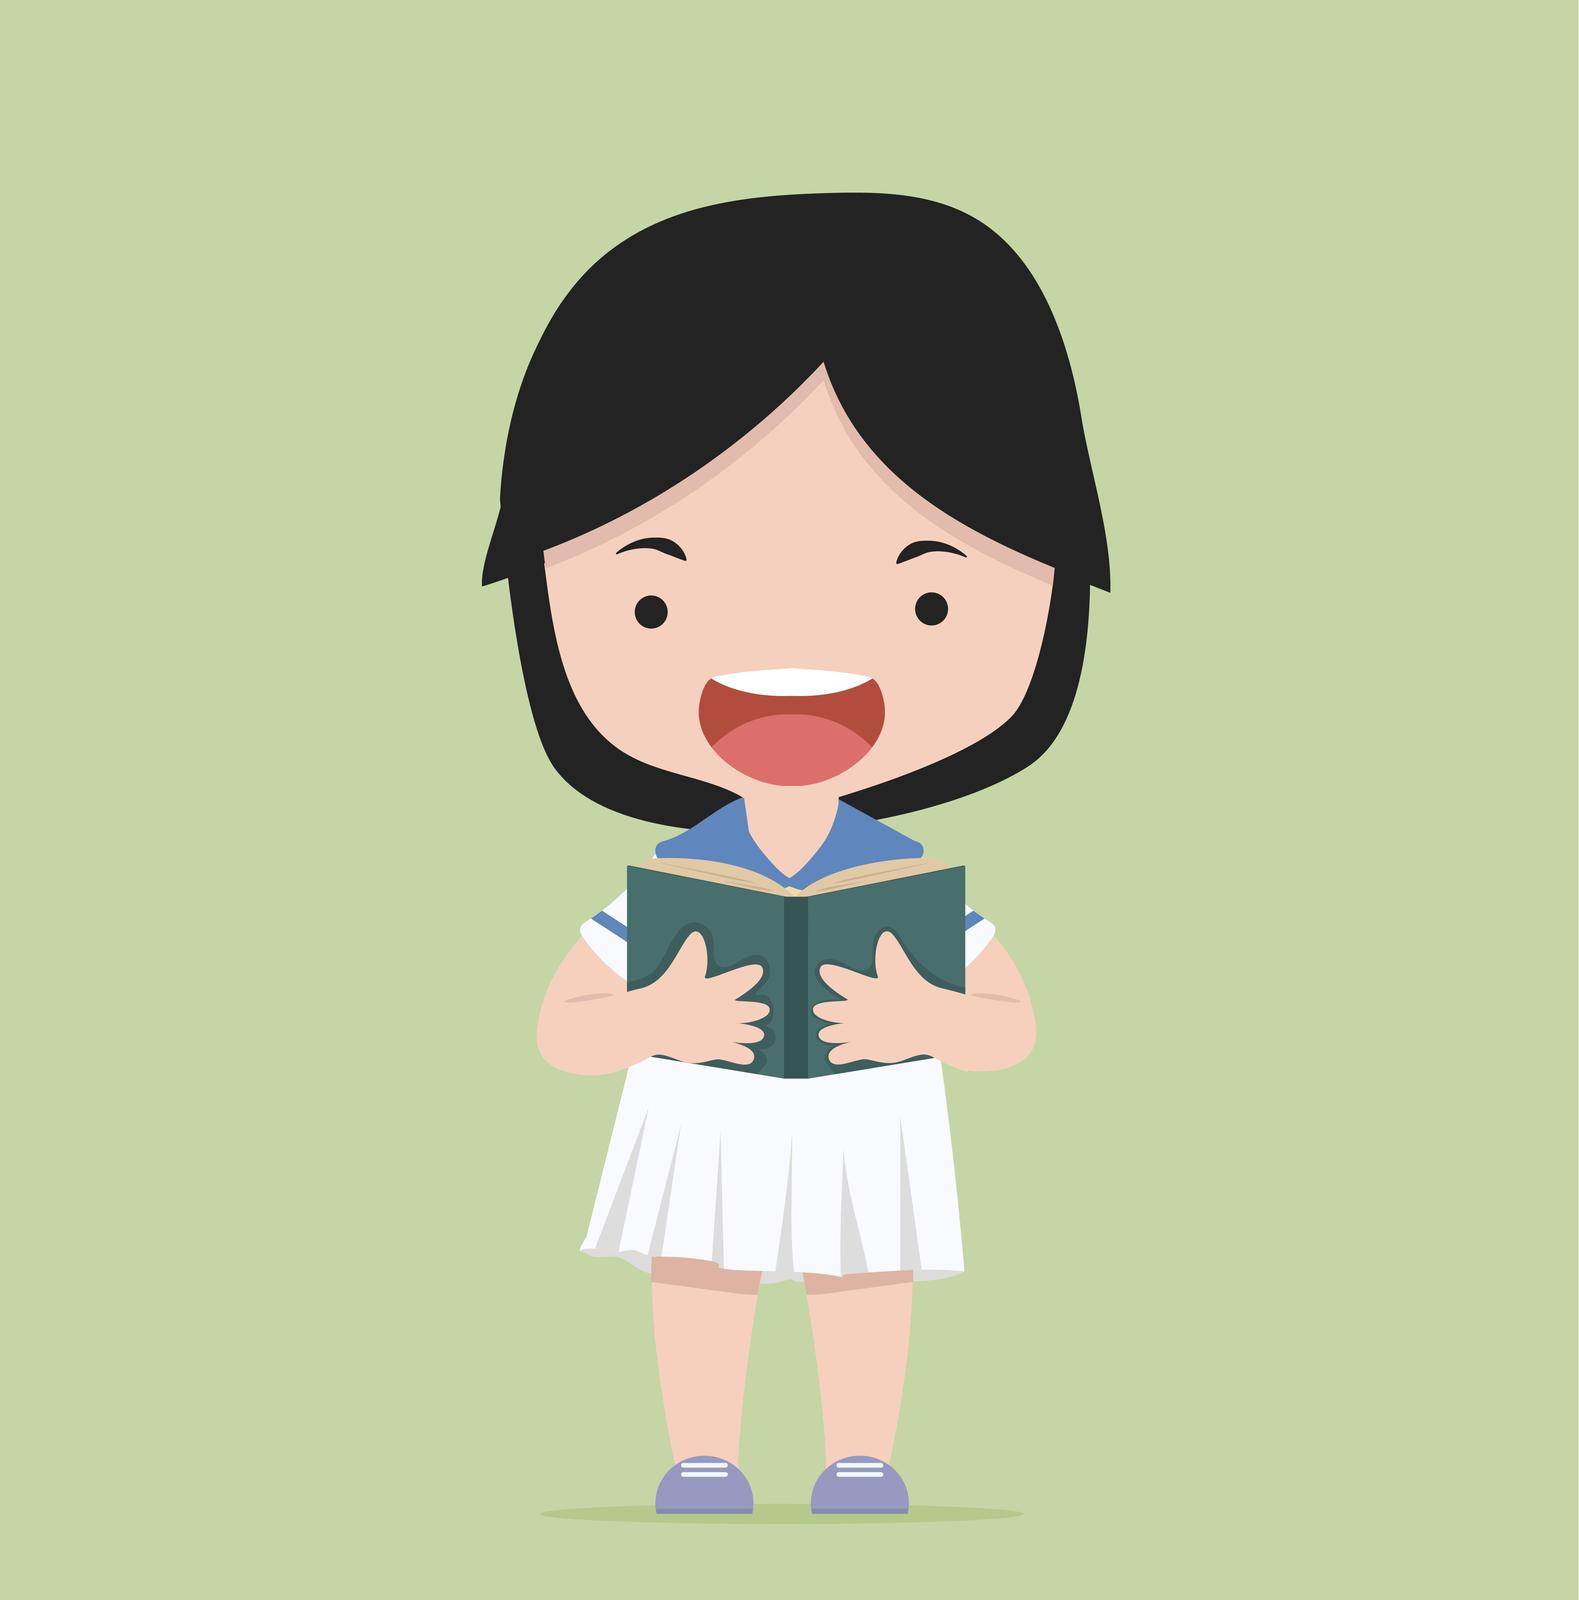 Small Girl Reading A Book vector by focus_bell